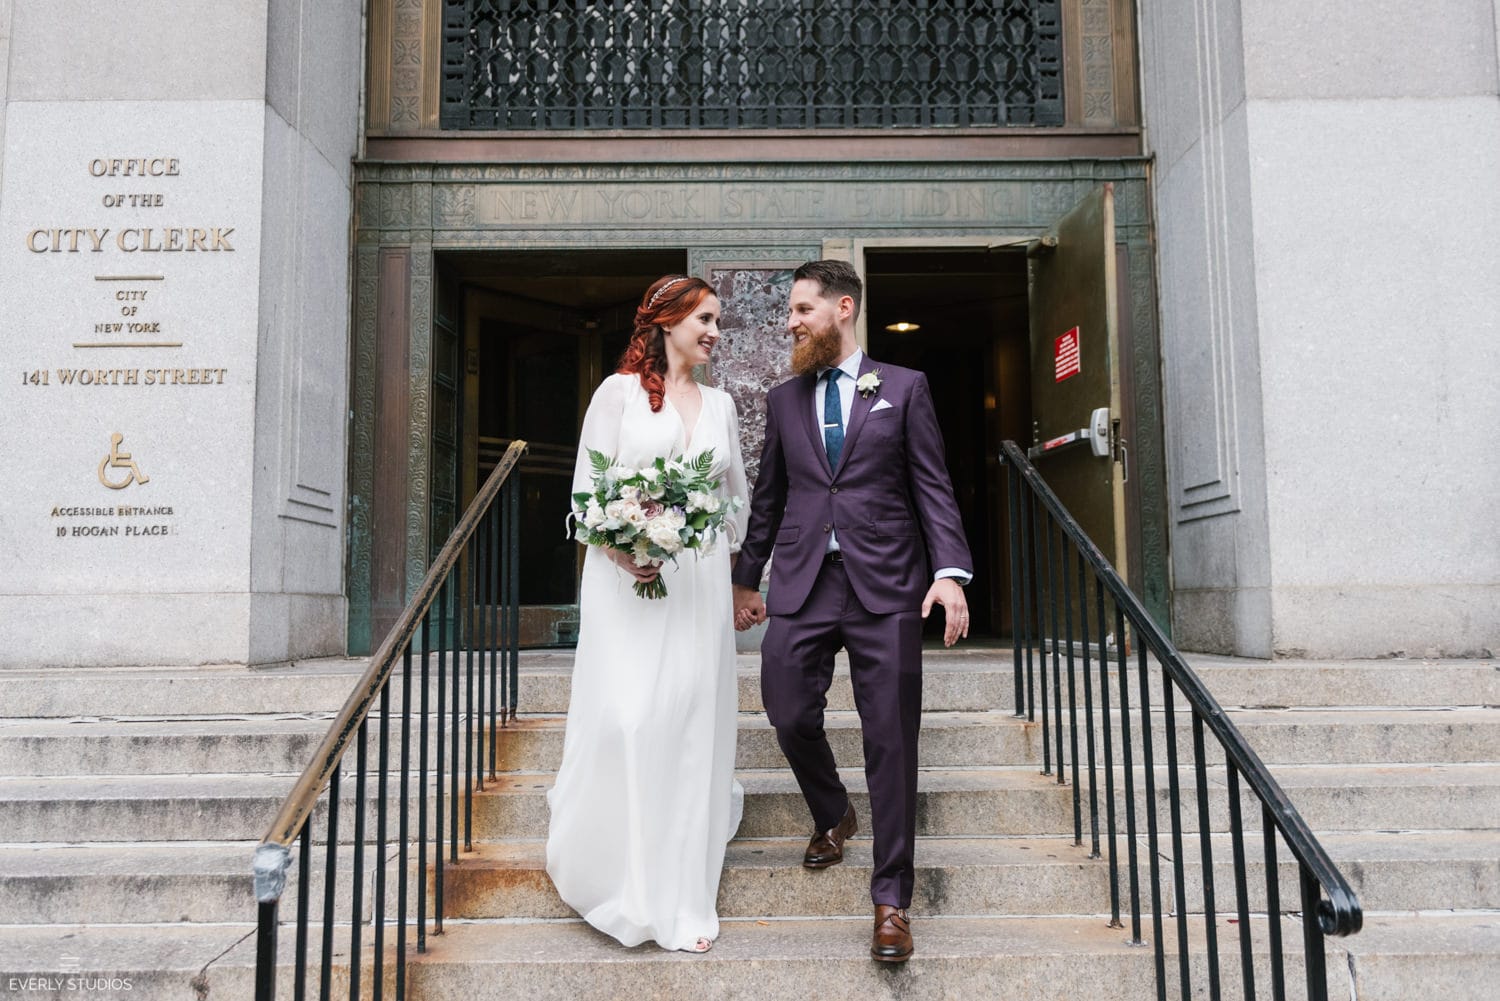 NYC City Hall elopement. Photos by NYC elopement photographer Everly Studios, www.everlystudios.com